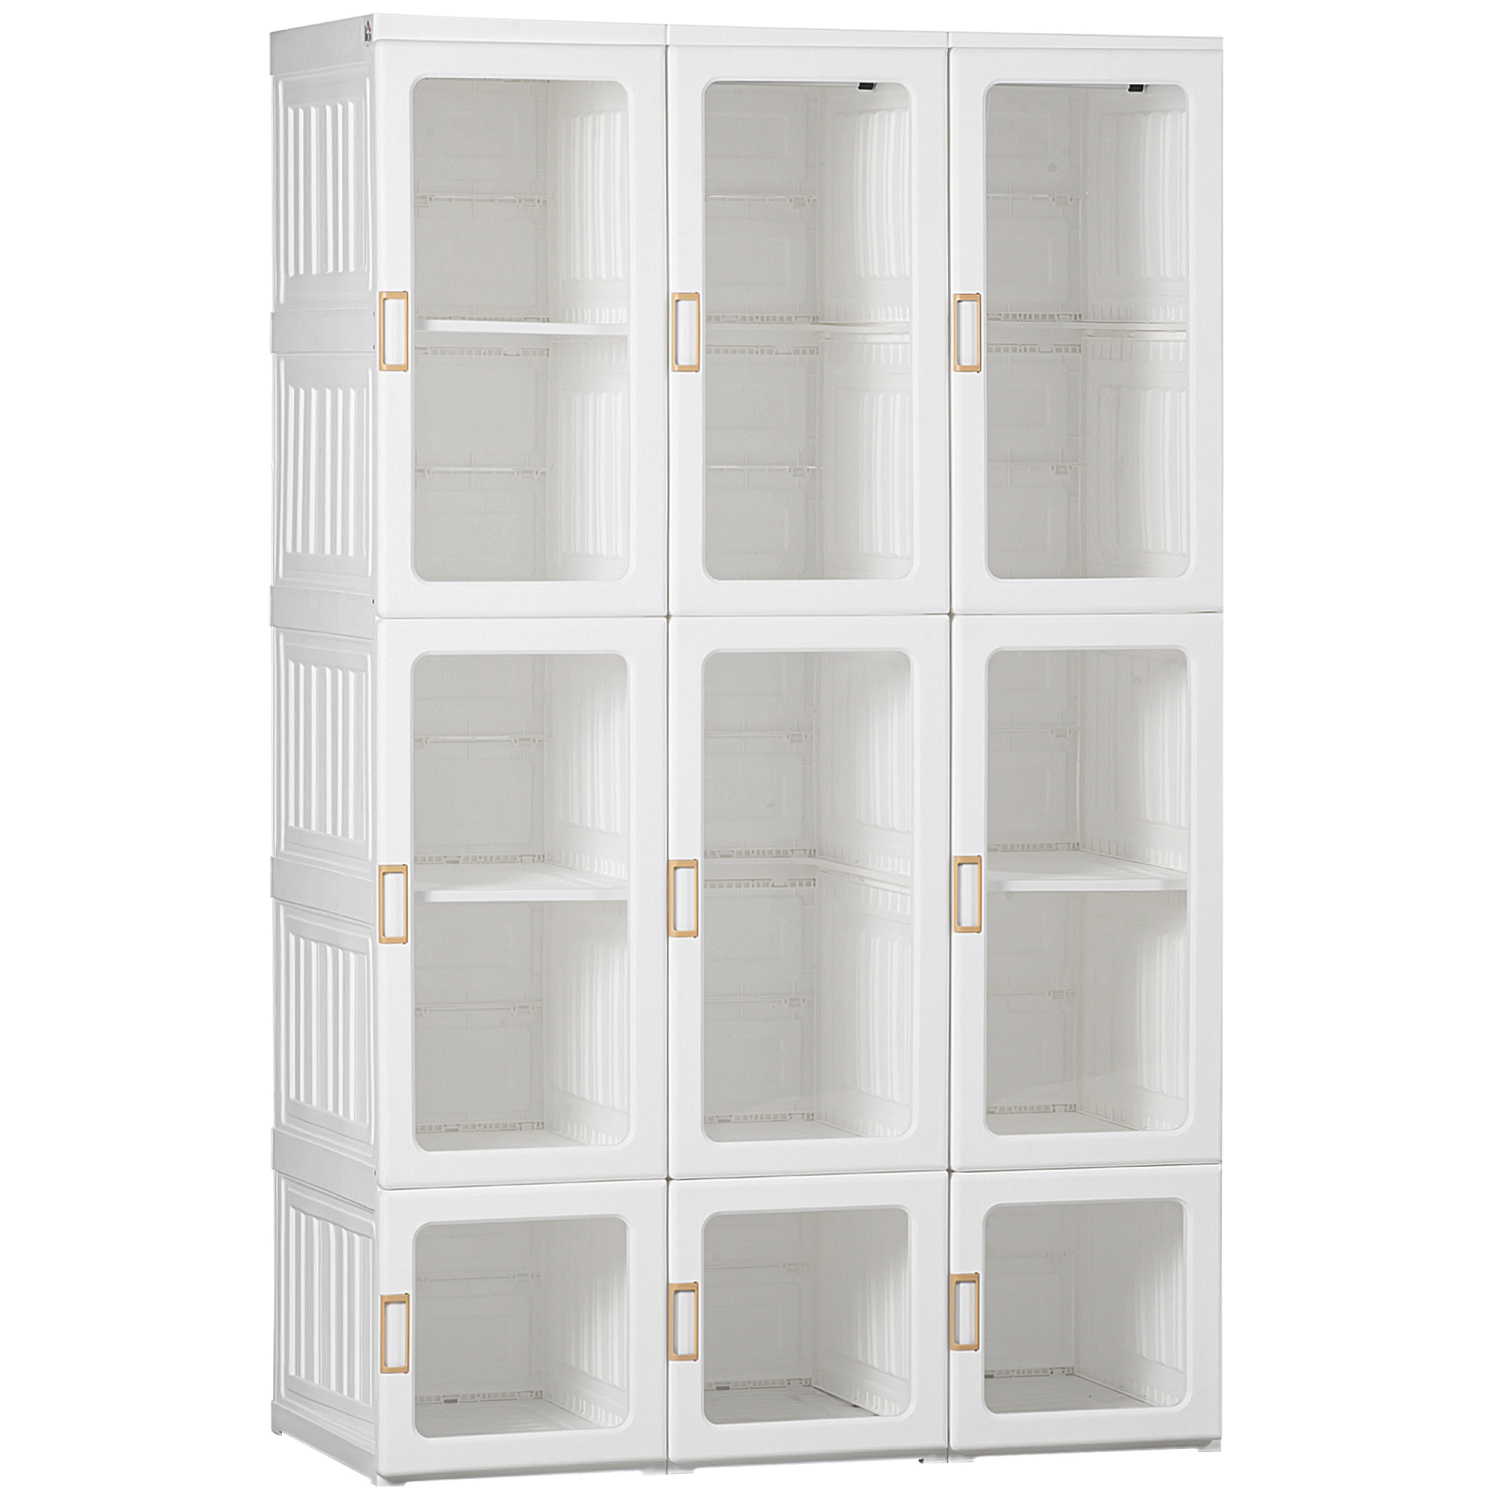 HOMCOM Portable Wardrobe Closet, Armoire, Foldable Clothes Organizer with Cube Storage, Hanging Rods, Magnet Doors, White